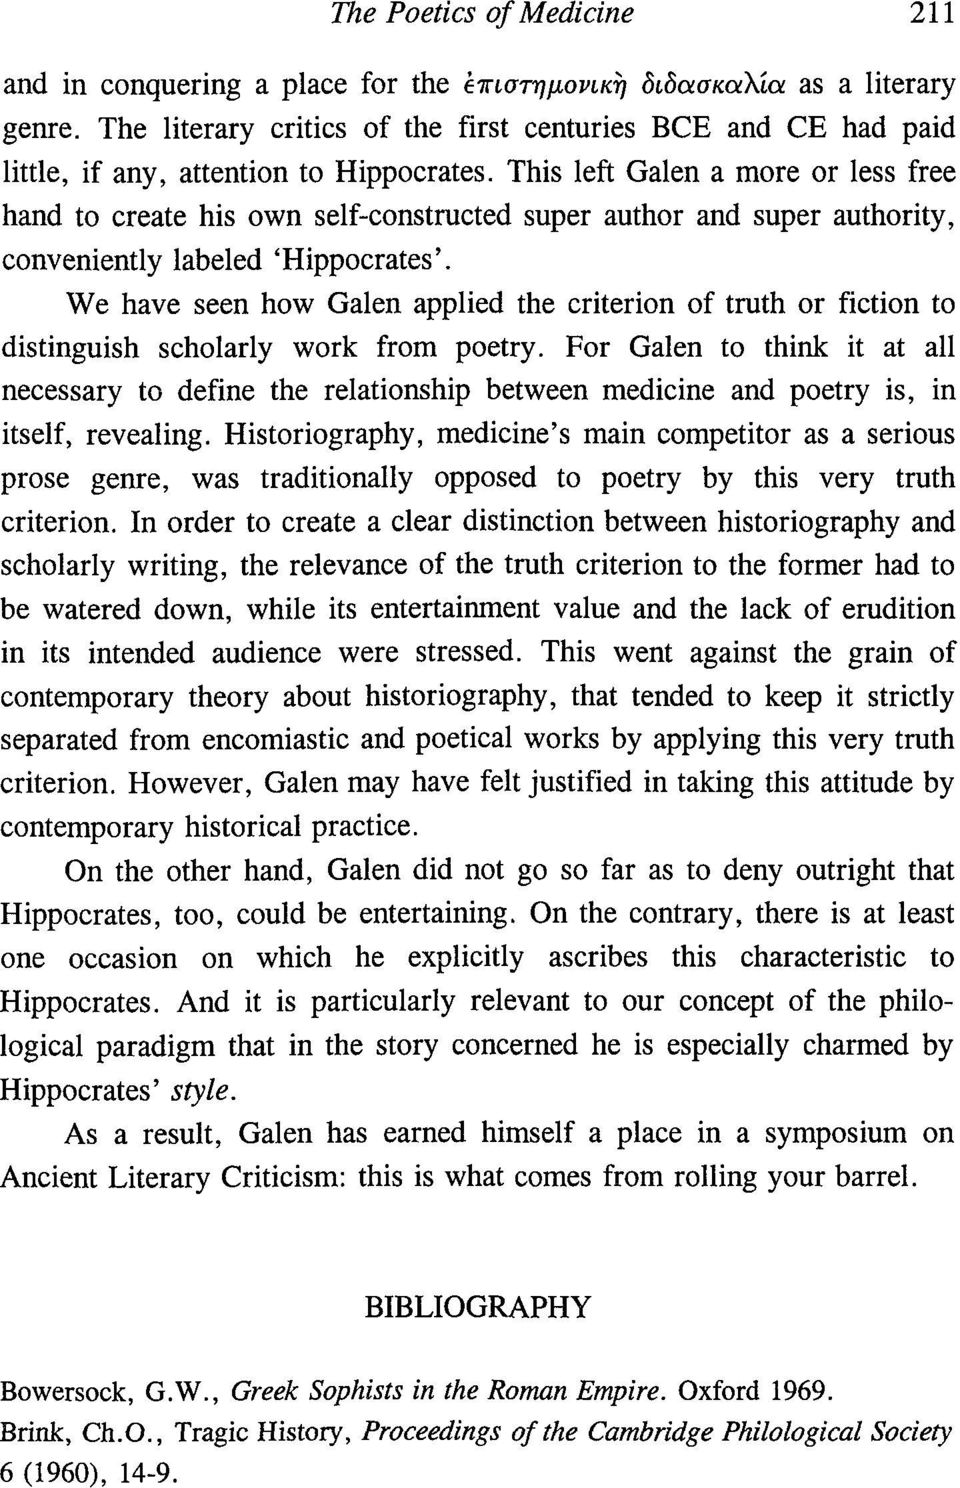 This left Galen a more or less free hand to create his own self-constructed super author and super authority, conveniently labeled 'Hippocrates'.